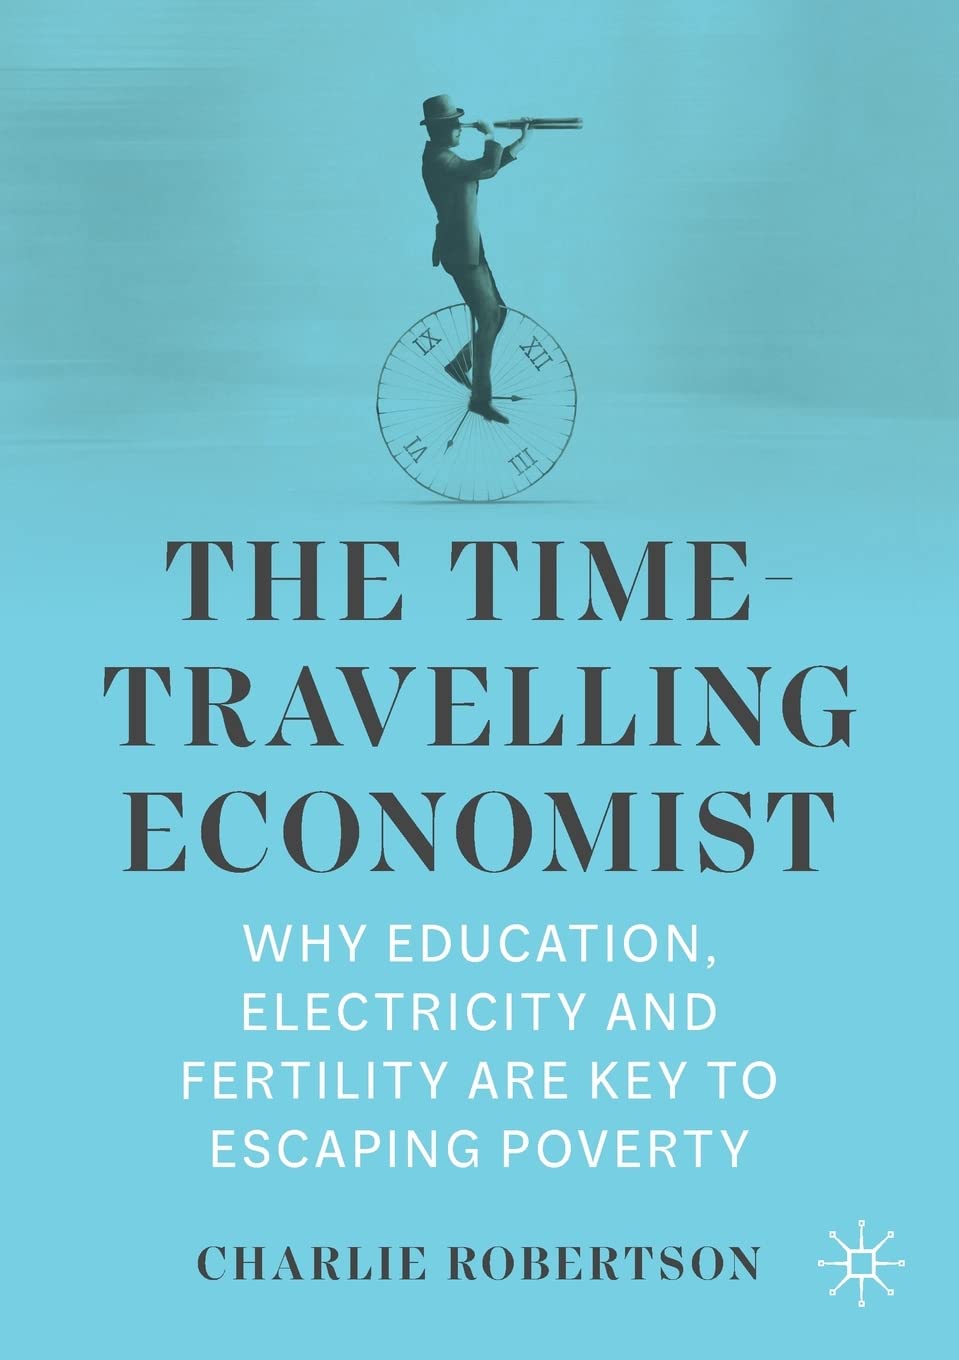 Escaping　The　to　and　Time　Nuria　Store　Are　Poverty　Travelling　Economist:　Charlie　by　Why　Education,　Key　Electricity　Fertility　Robertson